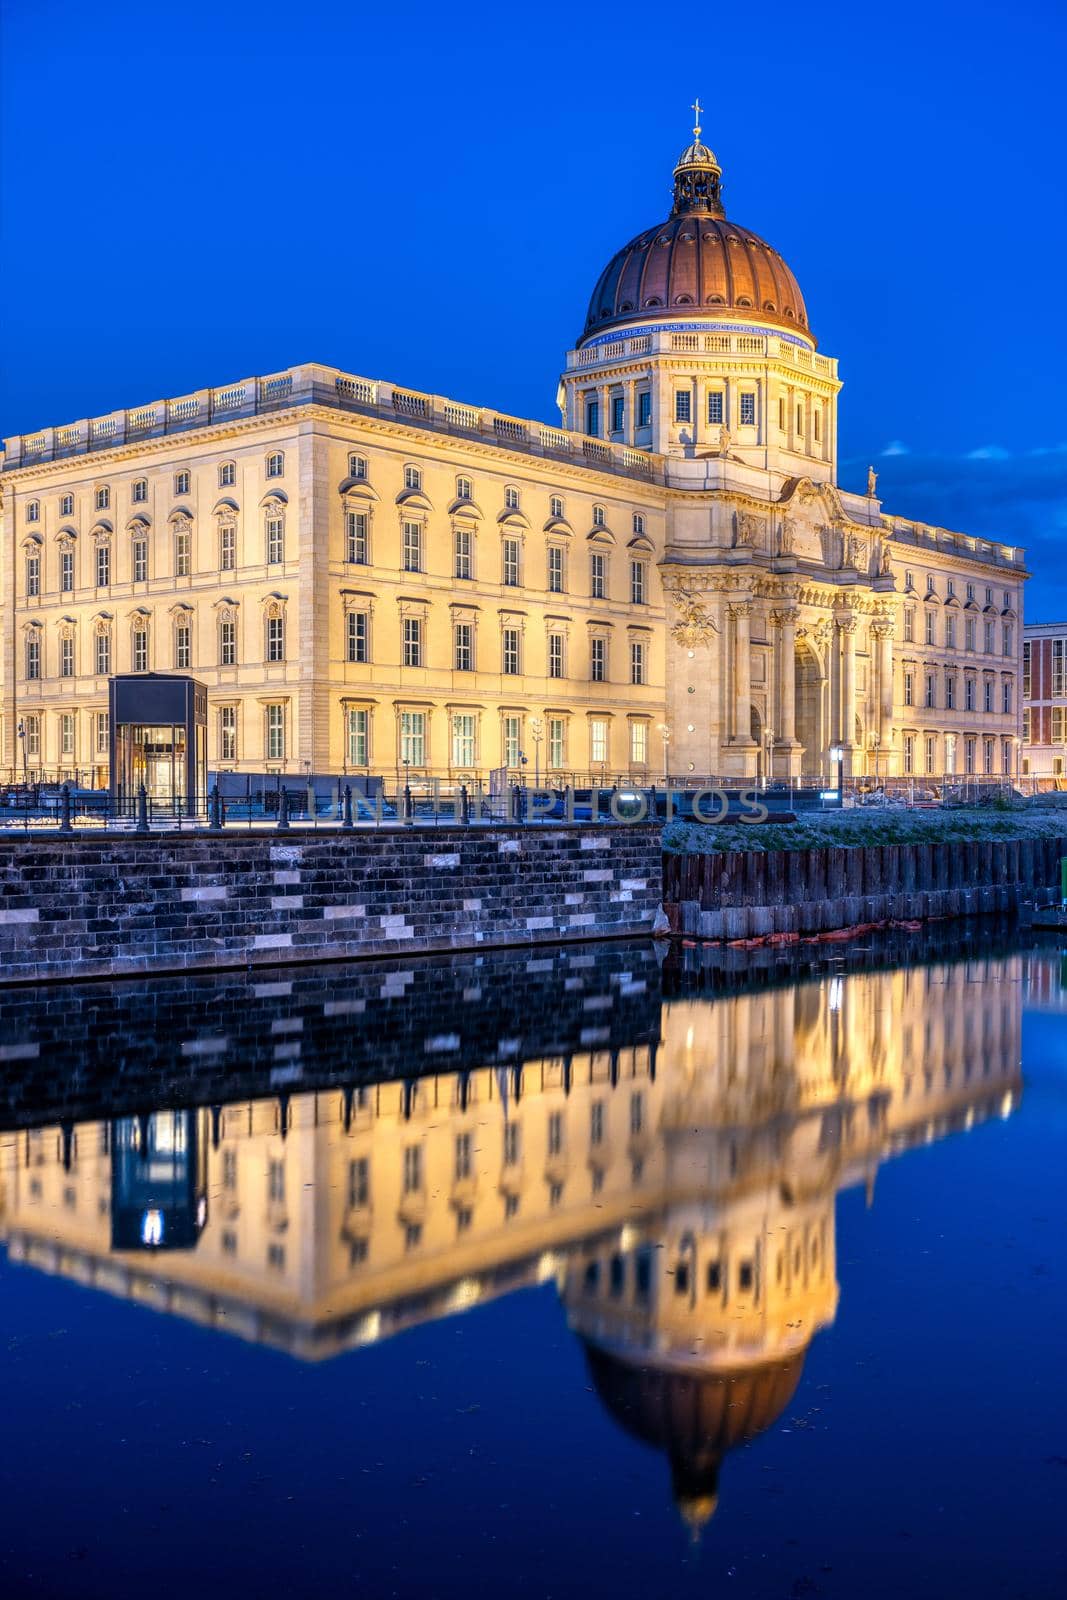 The reconstructed Berlin City Palace at night reflected in the river Spree